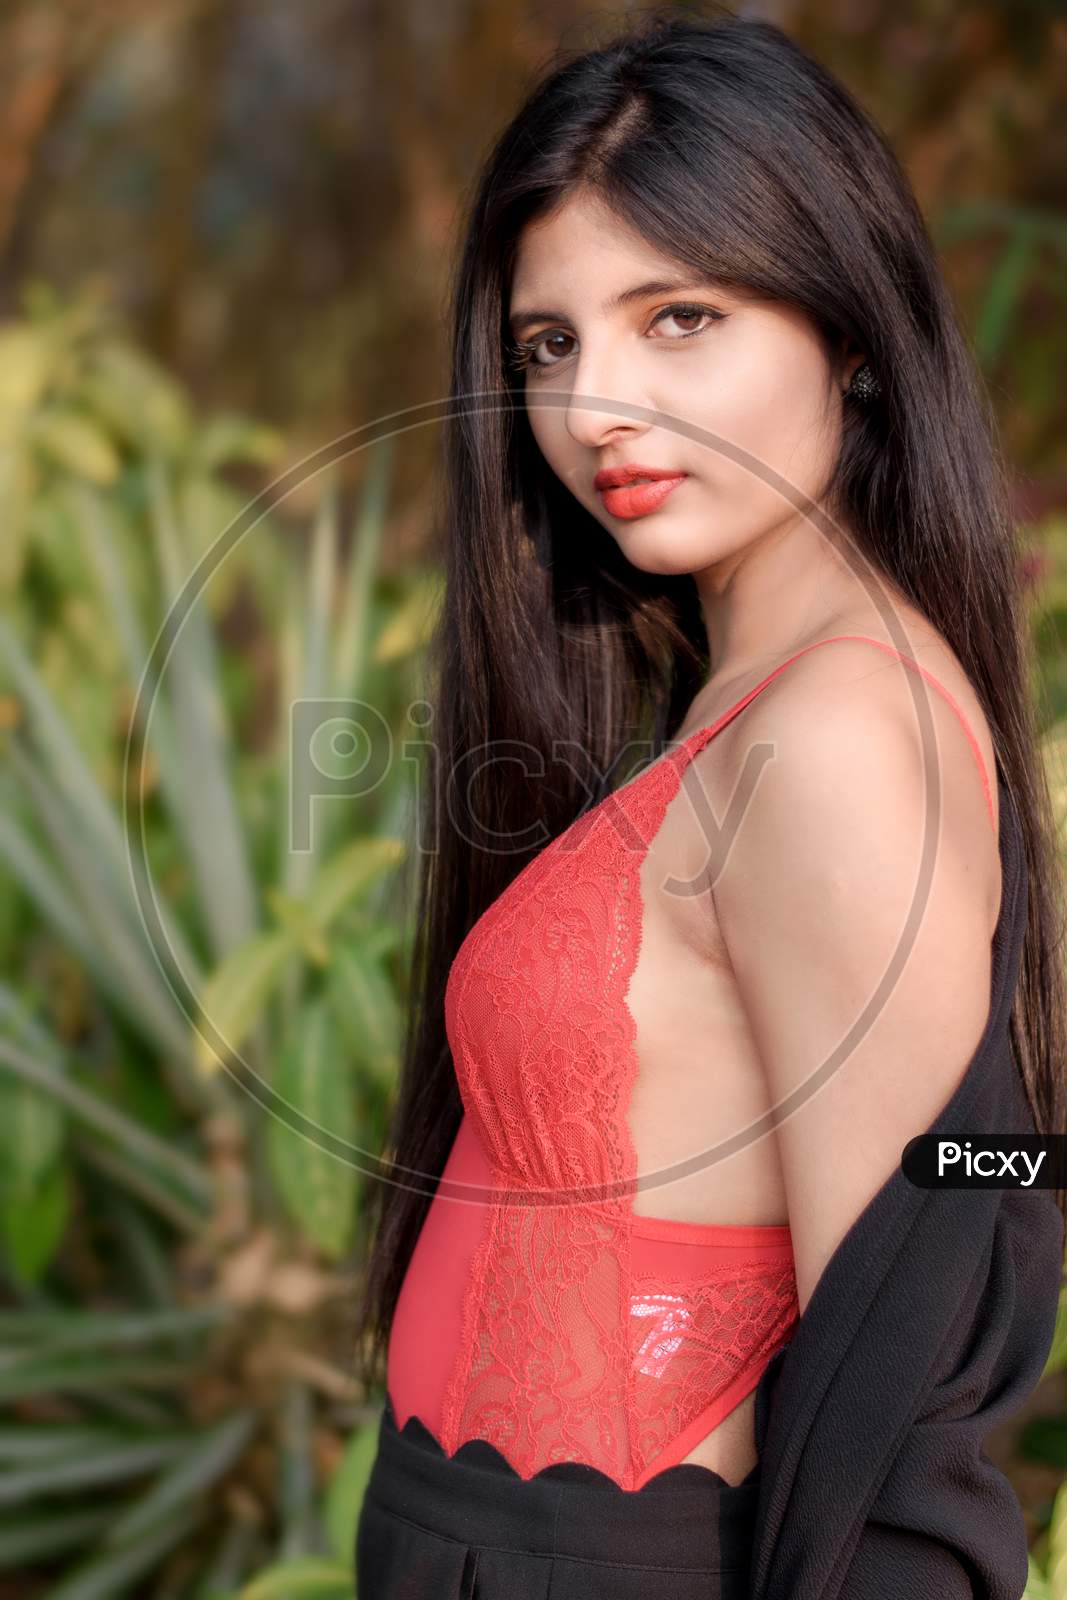 Portrait Of Very Beautiful Young Attractive Woman Wearing Red Outfit With Black Jacket Posing Fashionable In A Blurred Background. Lifestyle And Fashion.